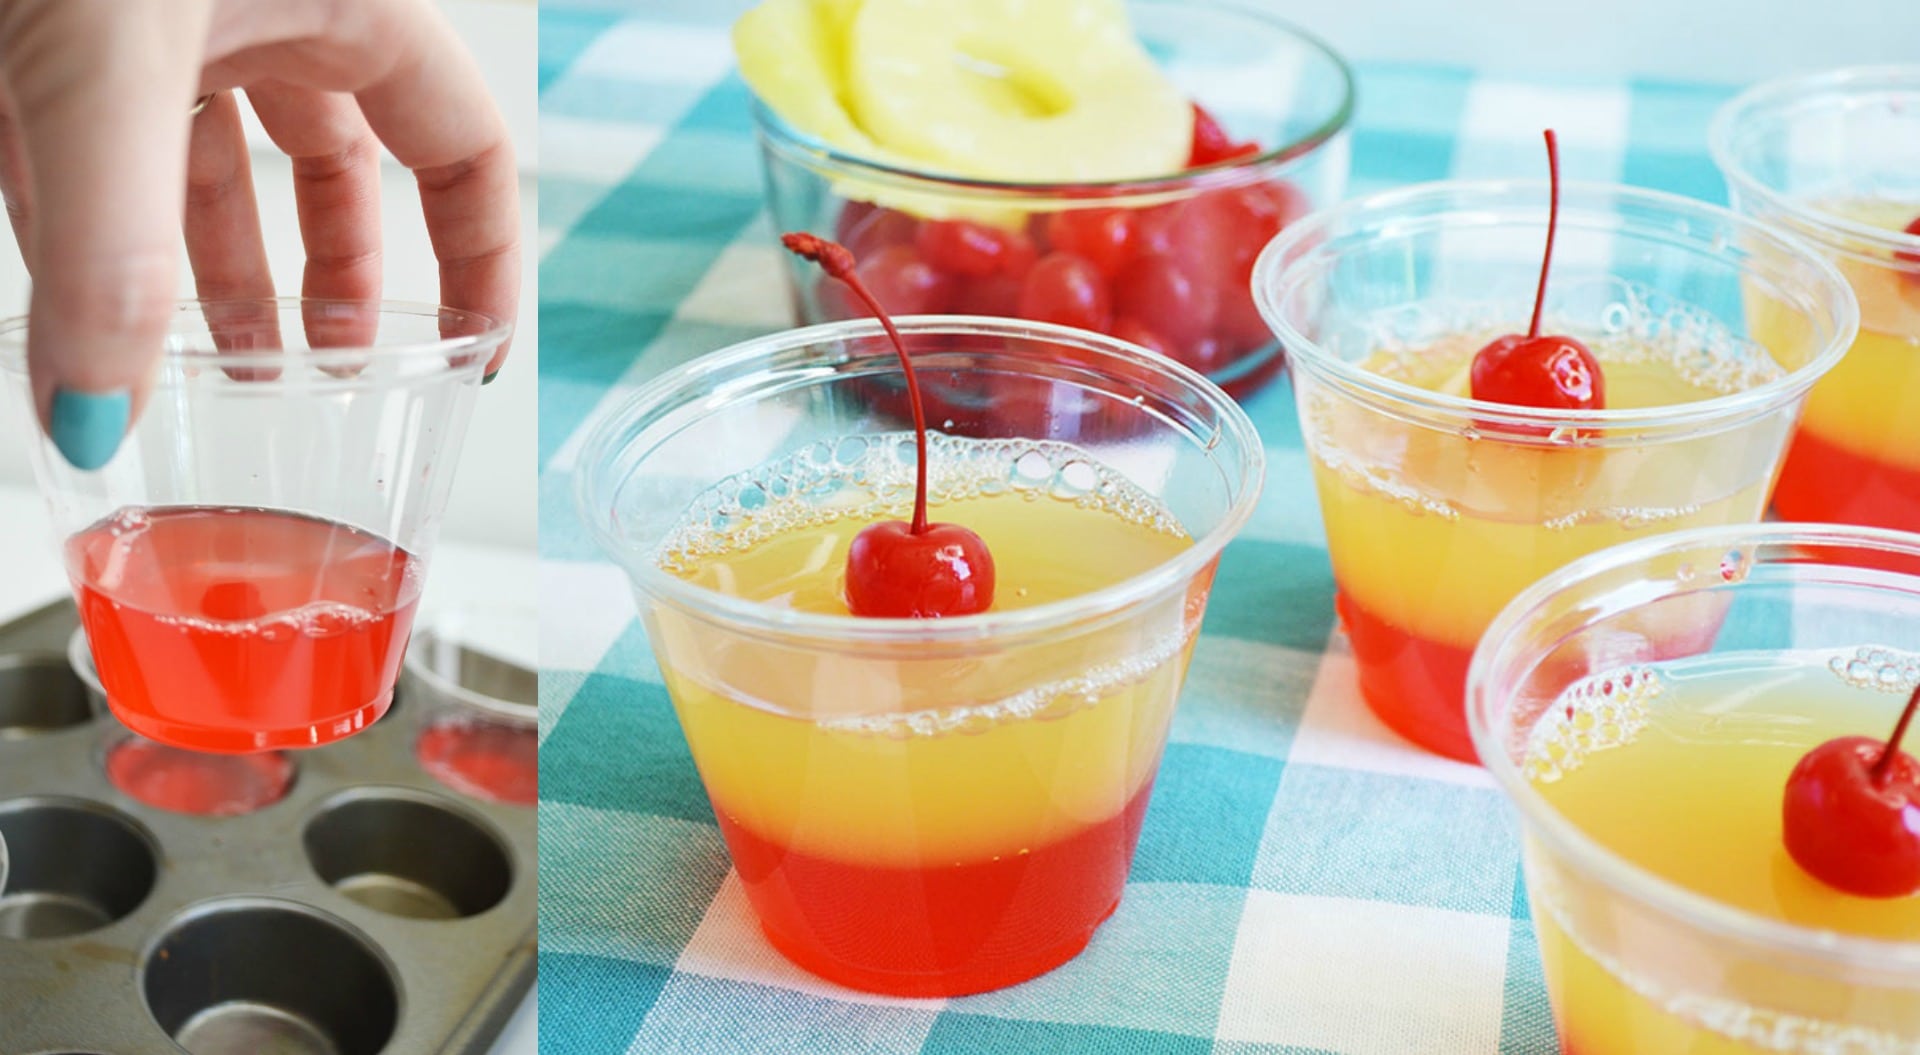 A collage with an image of four cherry and pineapple jello shots next to an image of someone placing a plastic cup full of red jello into a muffin tin